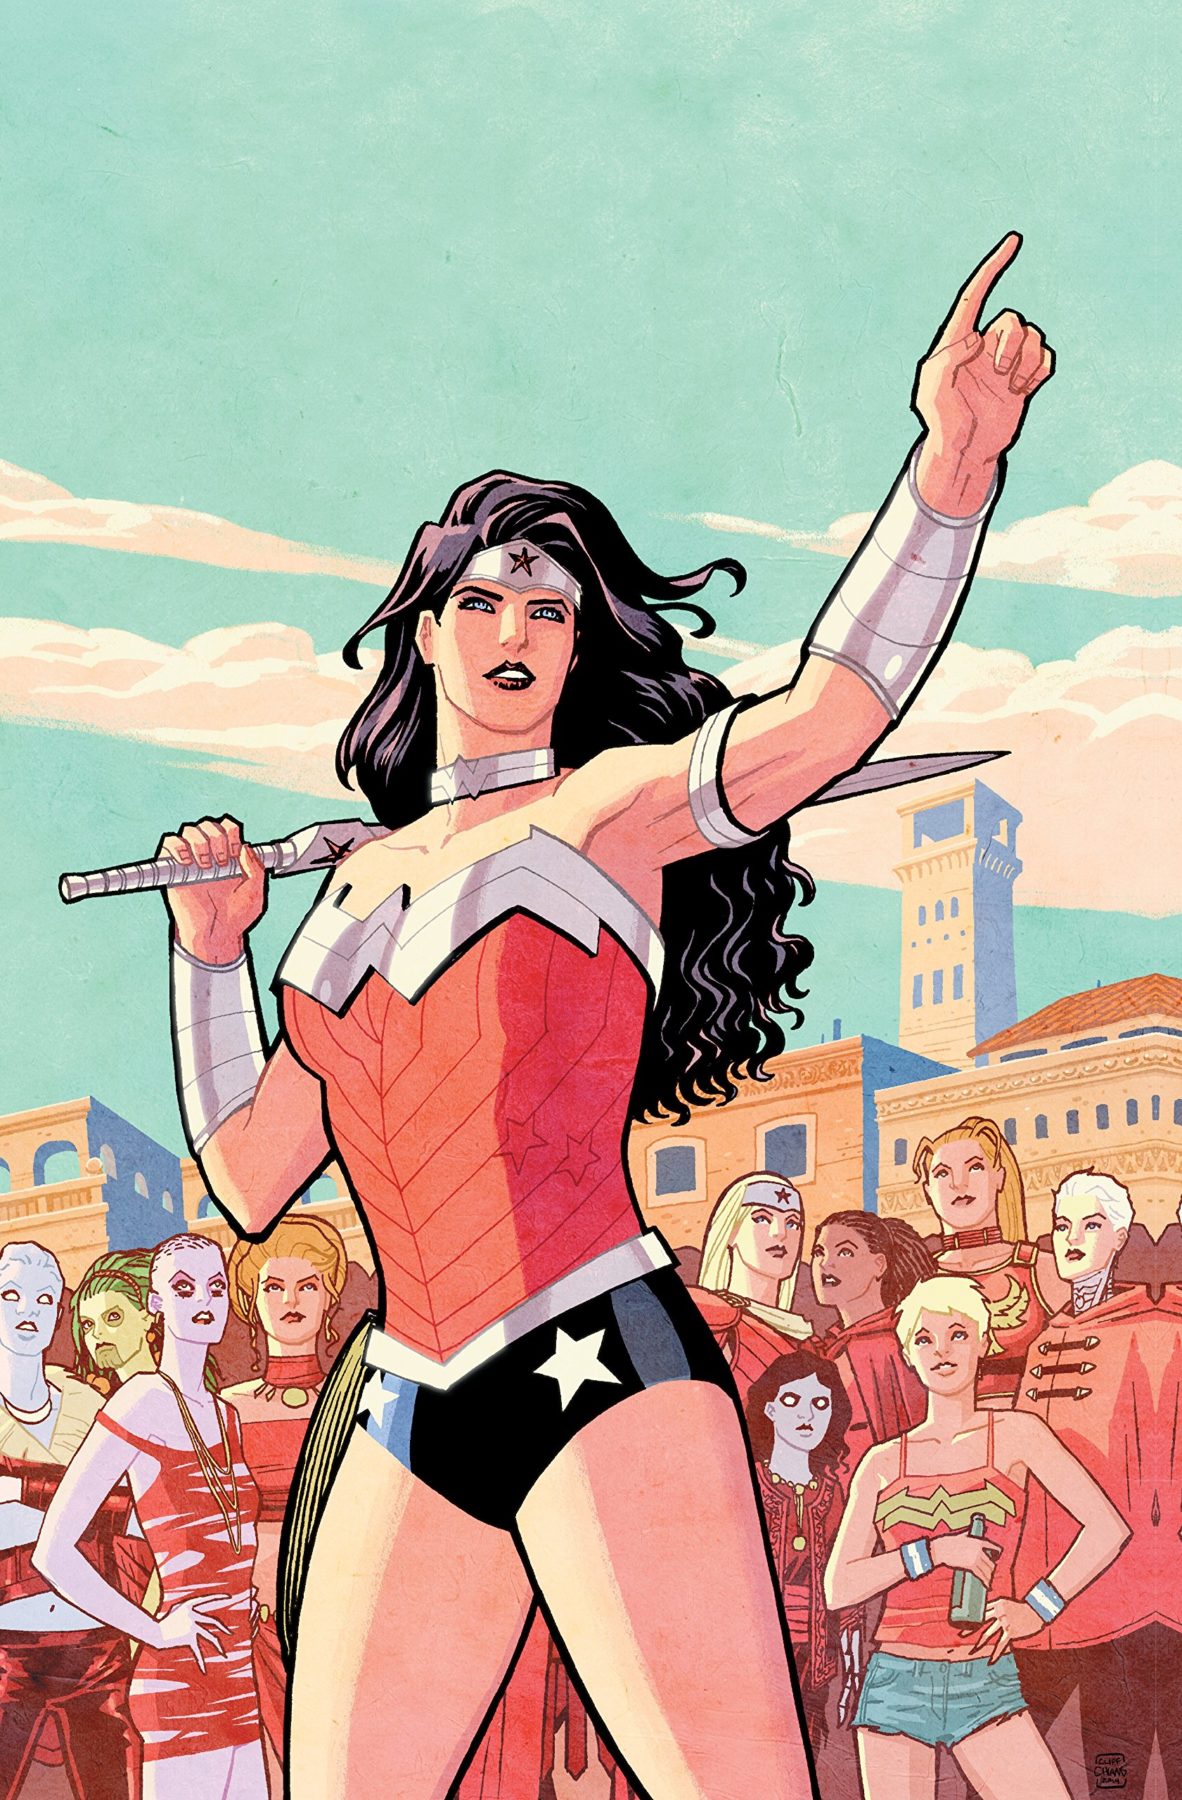 Comic Book Review - Absolute Wonder Woman by Brian Azzarello and Cliff